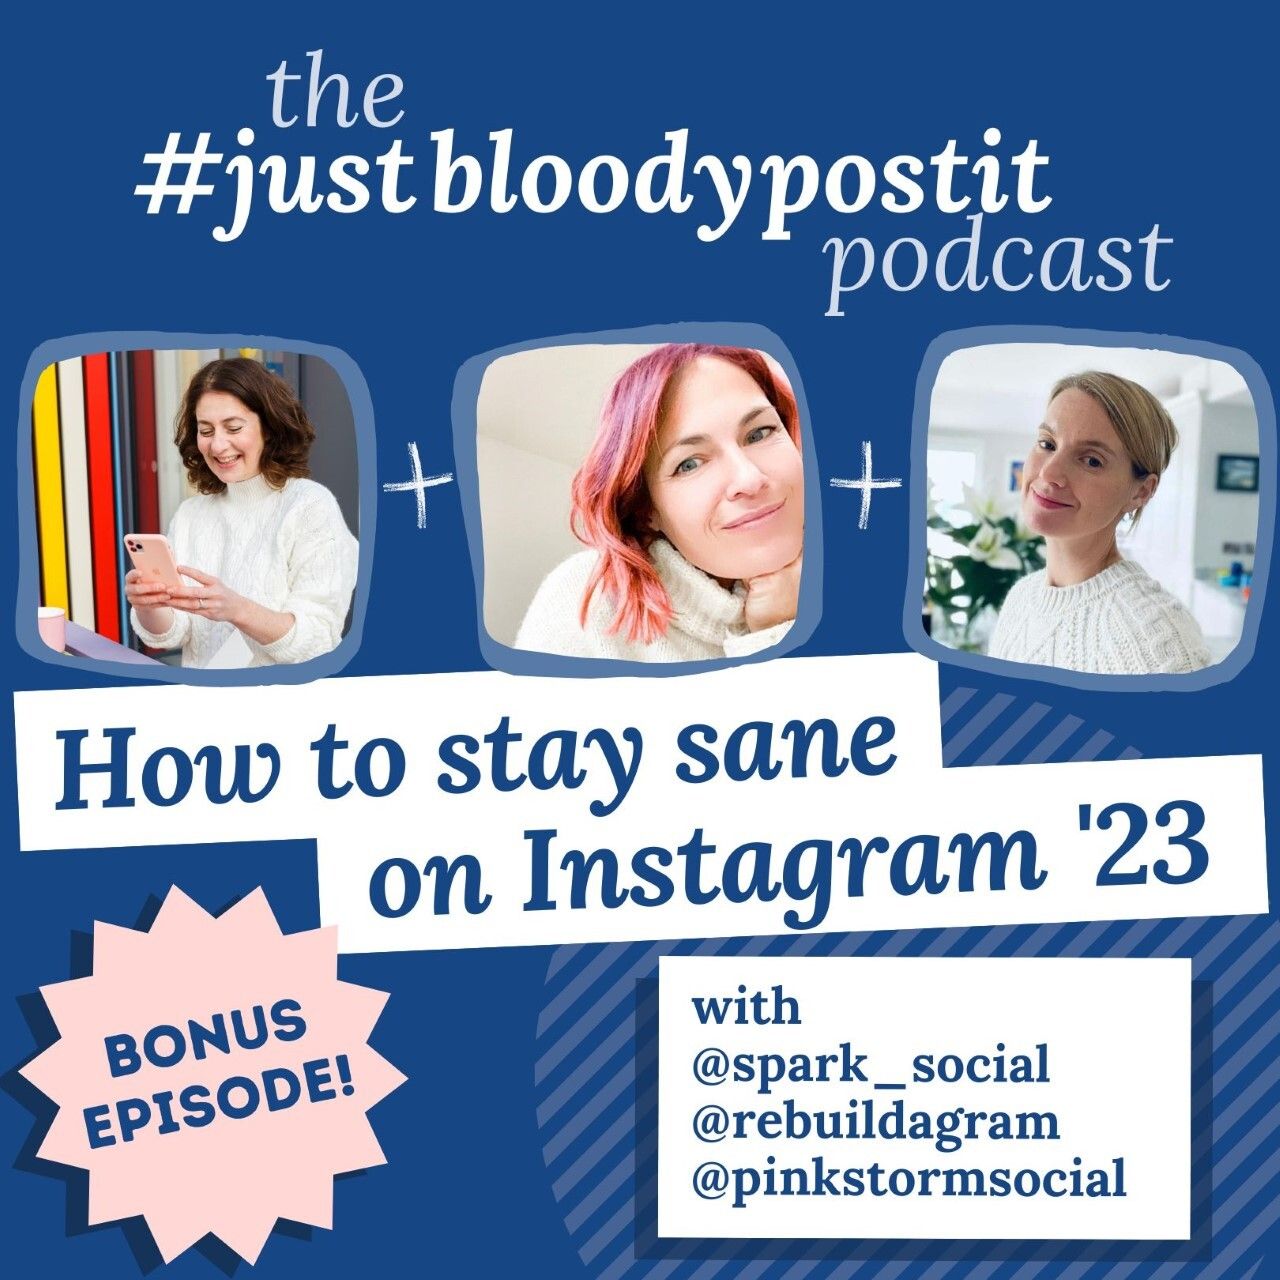 S5 Ep102: BONUS EPISODE #102 How to stay sane on Instagram in 2023 with Milla Richardson, Lou Chudley and Kirsty Raper